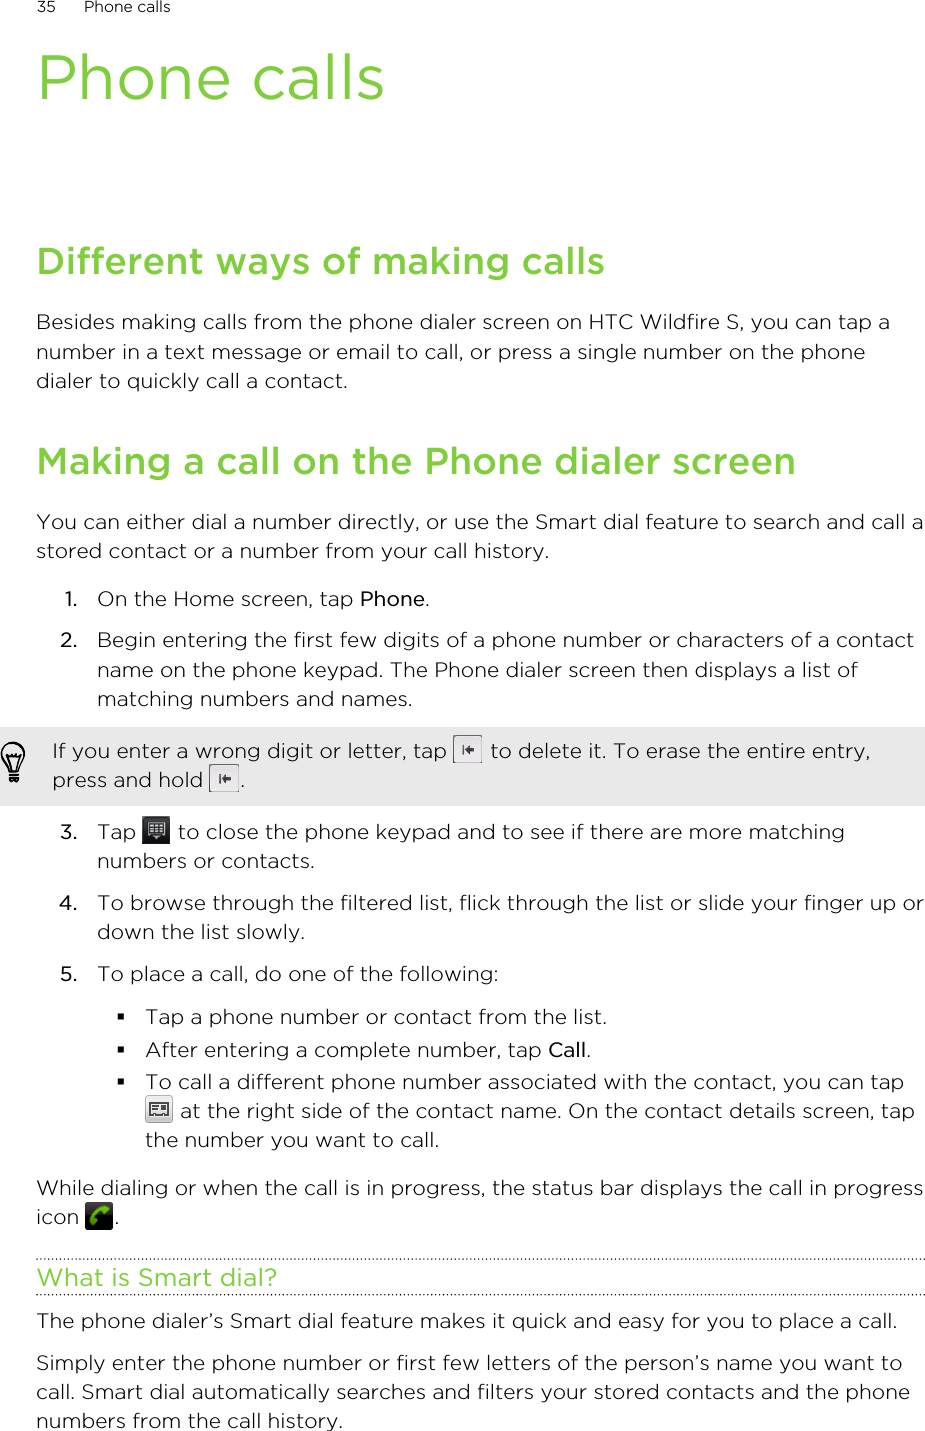 Phone callsDifferent ways of making callsBesides making calls from the phone dialer screen on HTC Wildfire S, you can tap anumber in a text message or email to call, or press a single number on the phonedialer to quickly call a contact.Making a call on the Phone dialer screenYou can either dial a number directly, or use the Smart dial feature to search and call astored contact or a number from your call history.1. On the Home screen, tap Phone.2. Begin entering the first few digits of a phone number or characters of a contactname on the phone keypad. The Phone dialer screen then displays a list ofmatching numbers and names.If you enter a wrong digit or letter, tap   to delete it. To erase the entire entry,press and hold  .3. Tap   to close the phone keypad and to see if there are more matchingnumbers or contacts.4. To browse through the filtered list, flick through the list or slide your finger up ordown the list slowly.5. To place a call, do one of the following:§Tap a phone number or contact from the list.§After entering a complete number, tap Call.§To call a different phone number associated with the contact, you can tap at the right side of the contact name. On the contact details screen, tapthe number you want to call.While dialing or when the call is in progress, the status bar displays the call in progressicon  .What is Smart dial?The phone dialer’s Smart dial feature makes it quick and easy for you to place a call.Simply enter the phone number or first few letters of the person’s name you want tocall. Smart dial automatically searches and filters your stored contacts and the phonenumbers from the call history.35 Phone calls